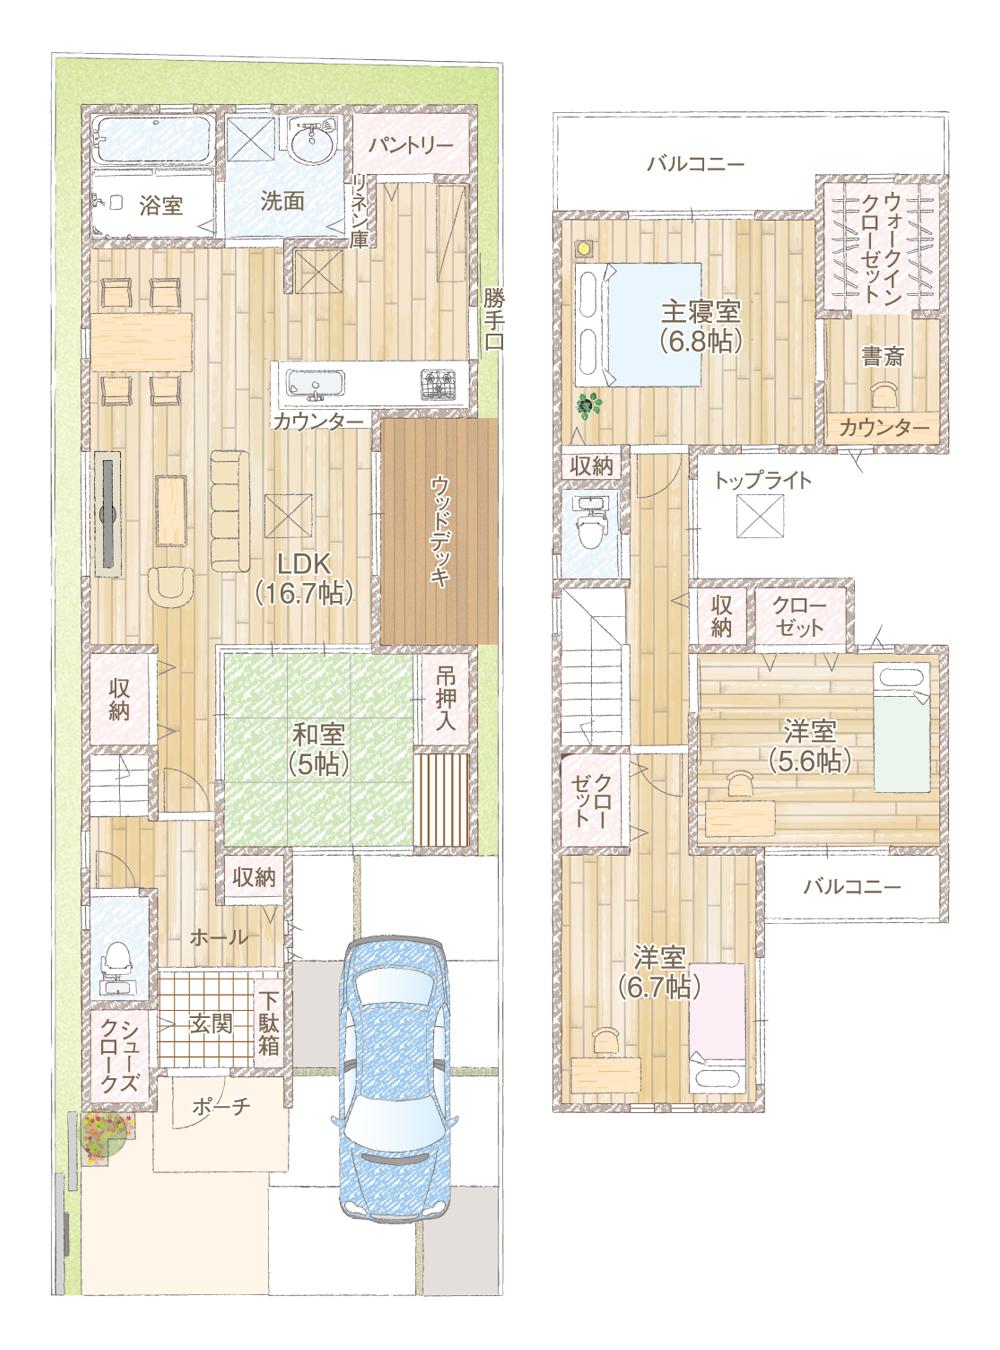 Floor plan. 28,900,000 yen, 4LDK + S (storeroom), Land area 108.47 sq m , Floor plan that fulfilled the ideal of building area 98 sq m wife. Point each week, such as housework conductors and ingenuity has been housed.